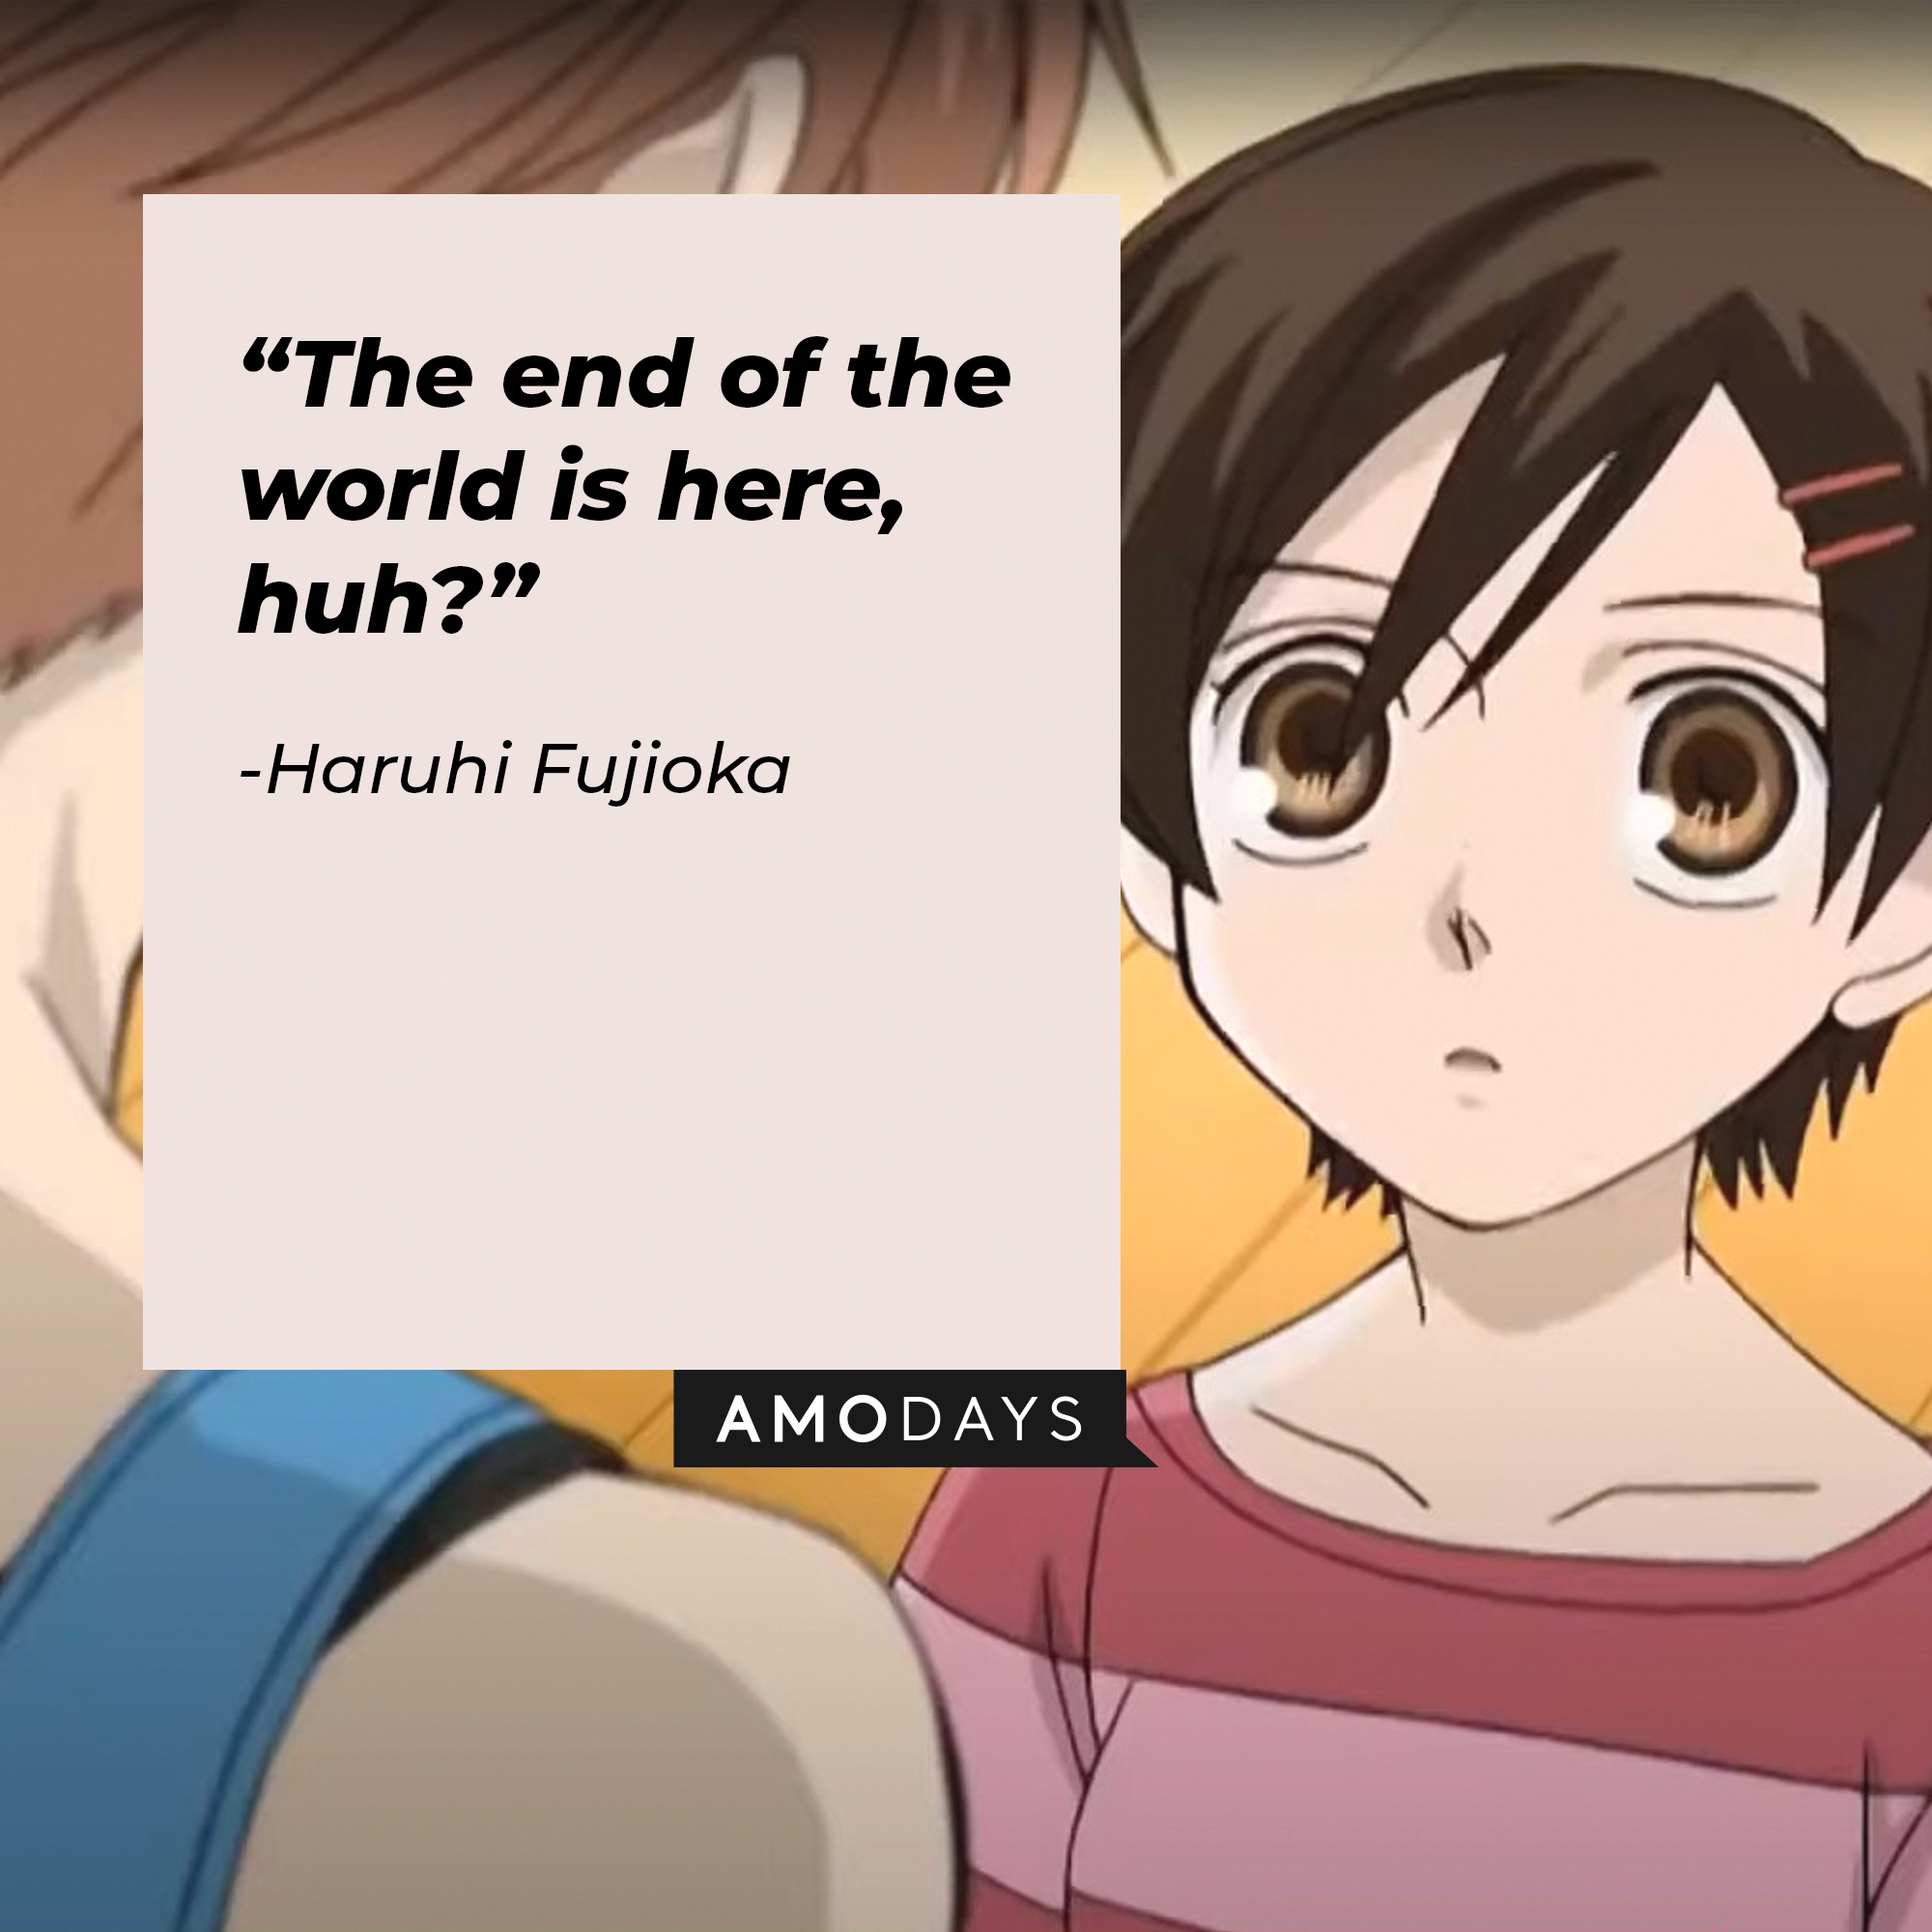 A picture of the anime character Haruhi Fujioka conversing with another character, with a quote by her that reads, “The end of the world is here, huh?” | Image: facebook.com/theouranhostclub